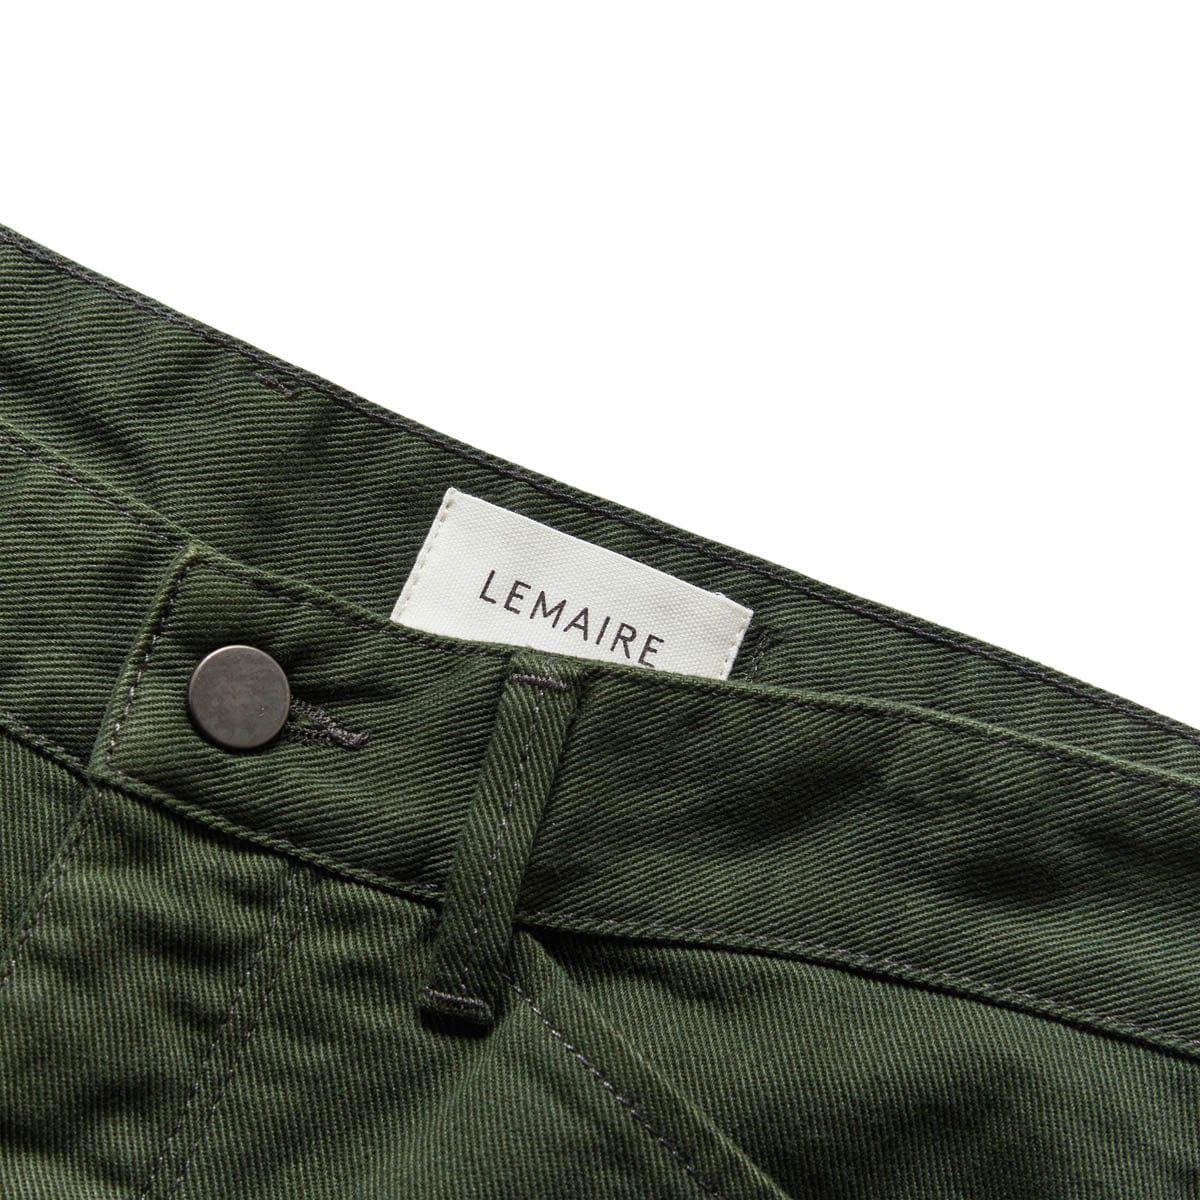 Buy Lemaire Curved 5 Pocket Pants 'Clay White' - PA1055 LD1001